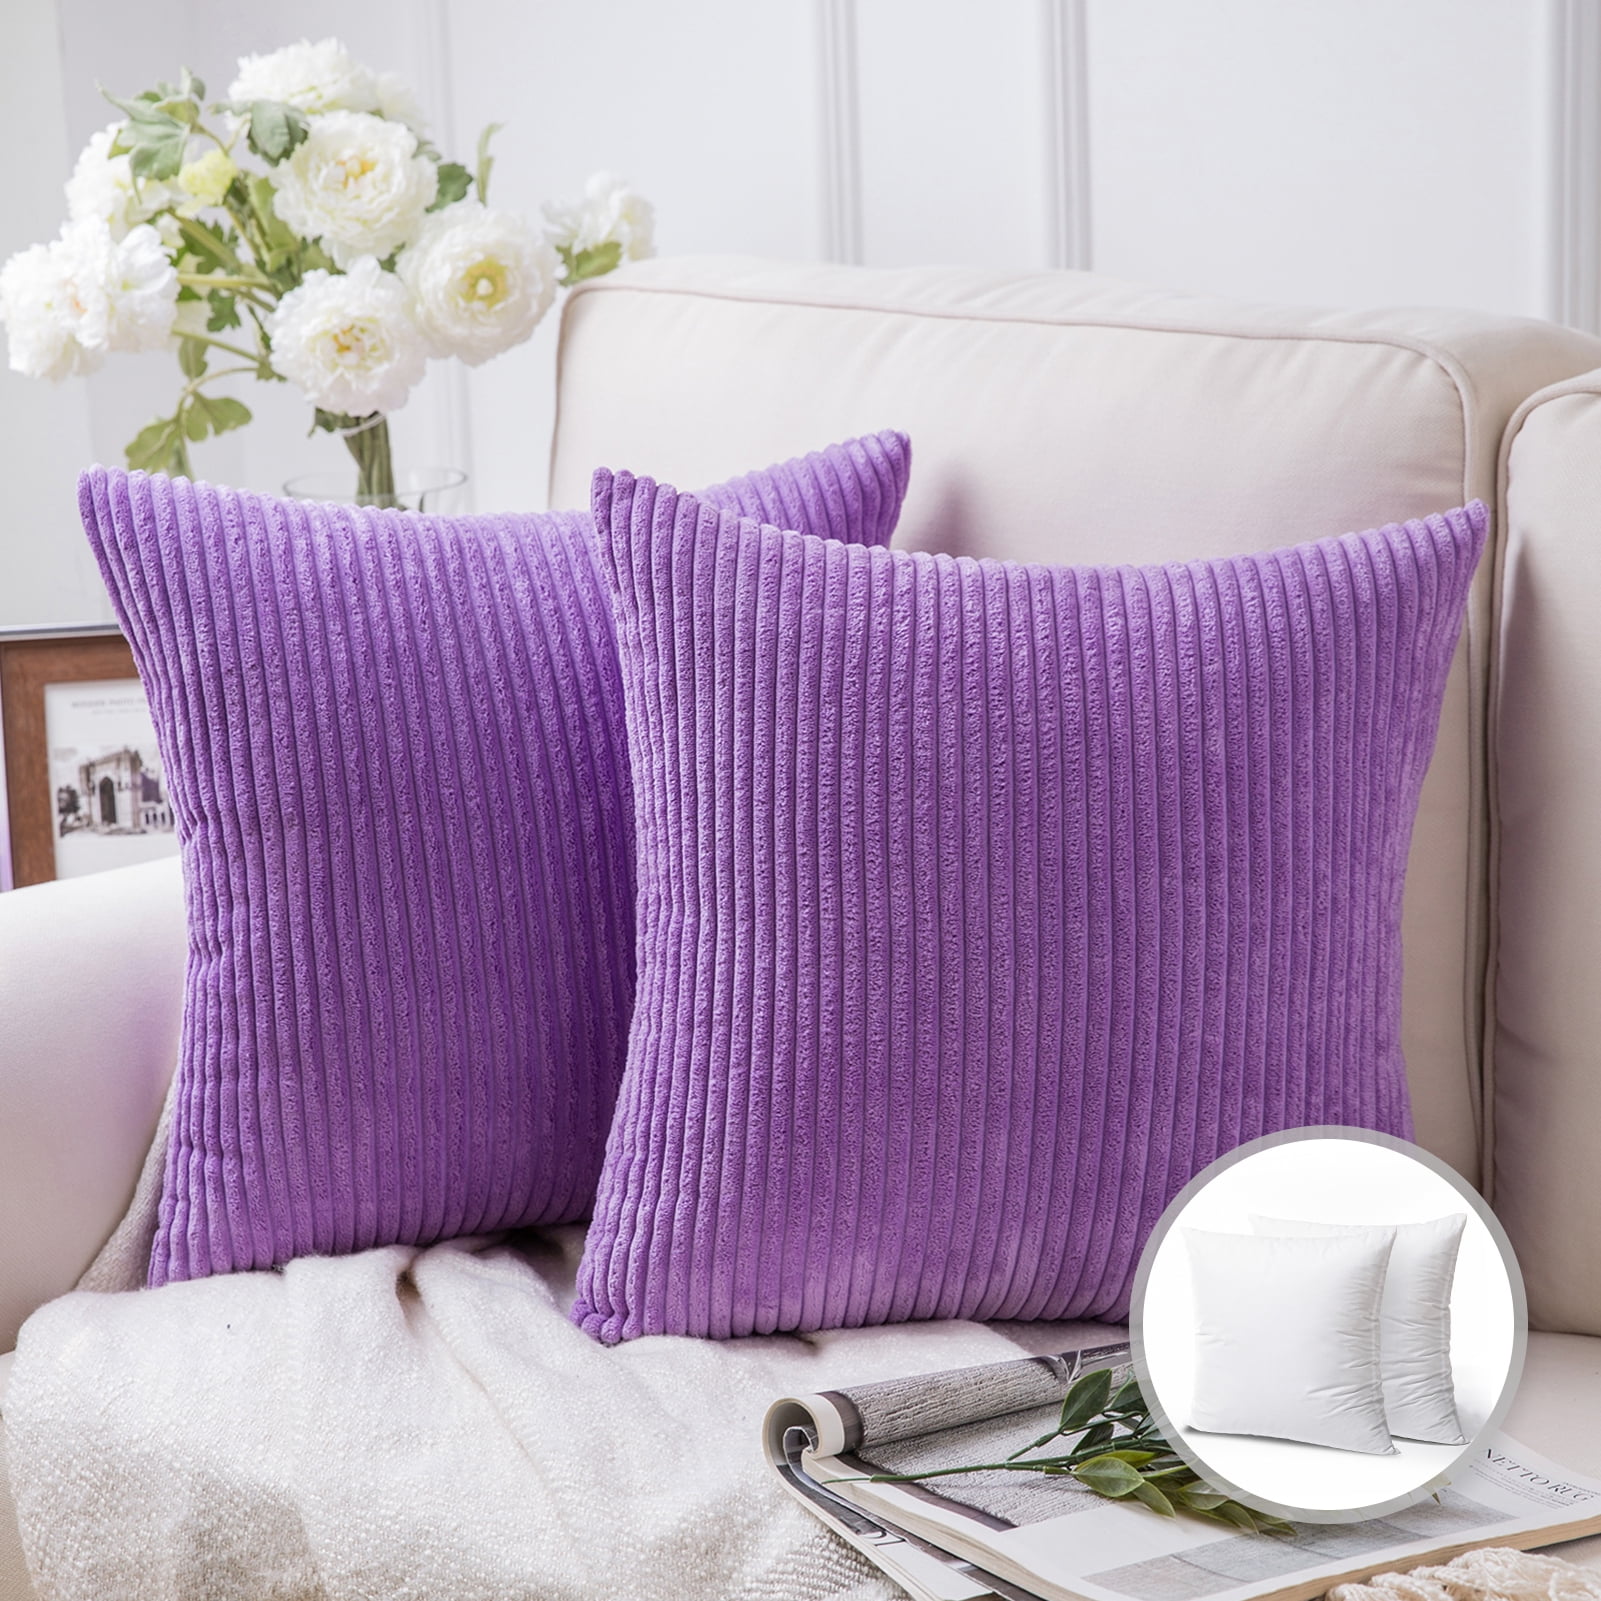 Wide Wale Corduroy 18x18 Oyster Throw Pillow | Pillow Decor